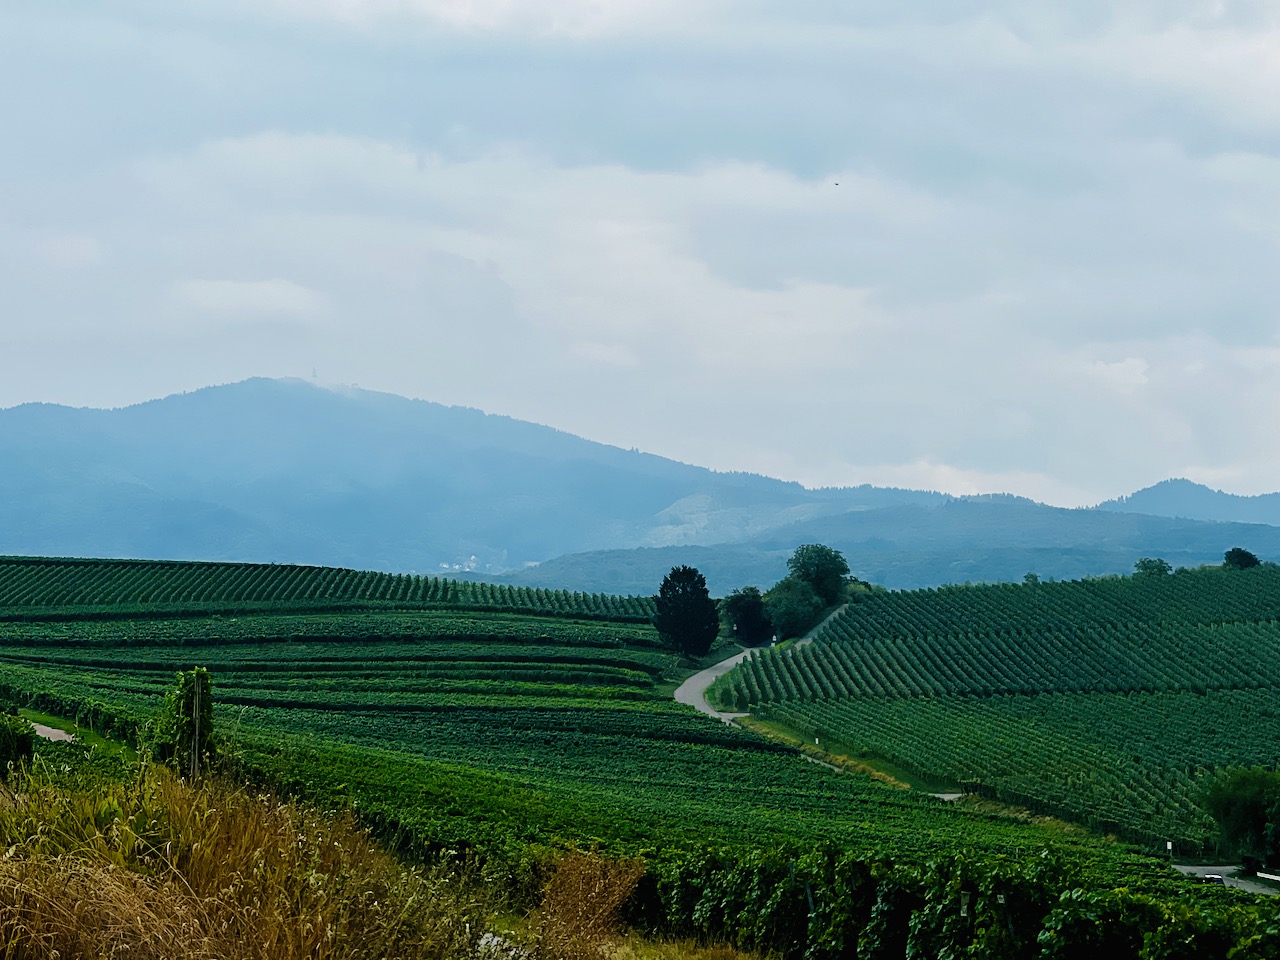 Summer grapevines in the winegrowing region of Baden in Germany with the Black Forest in the distance